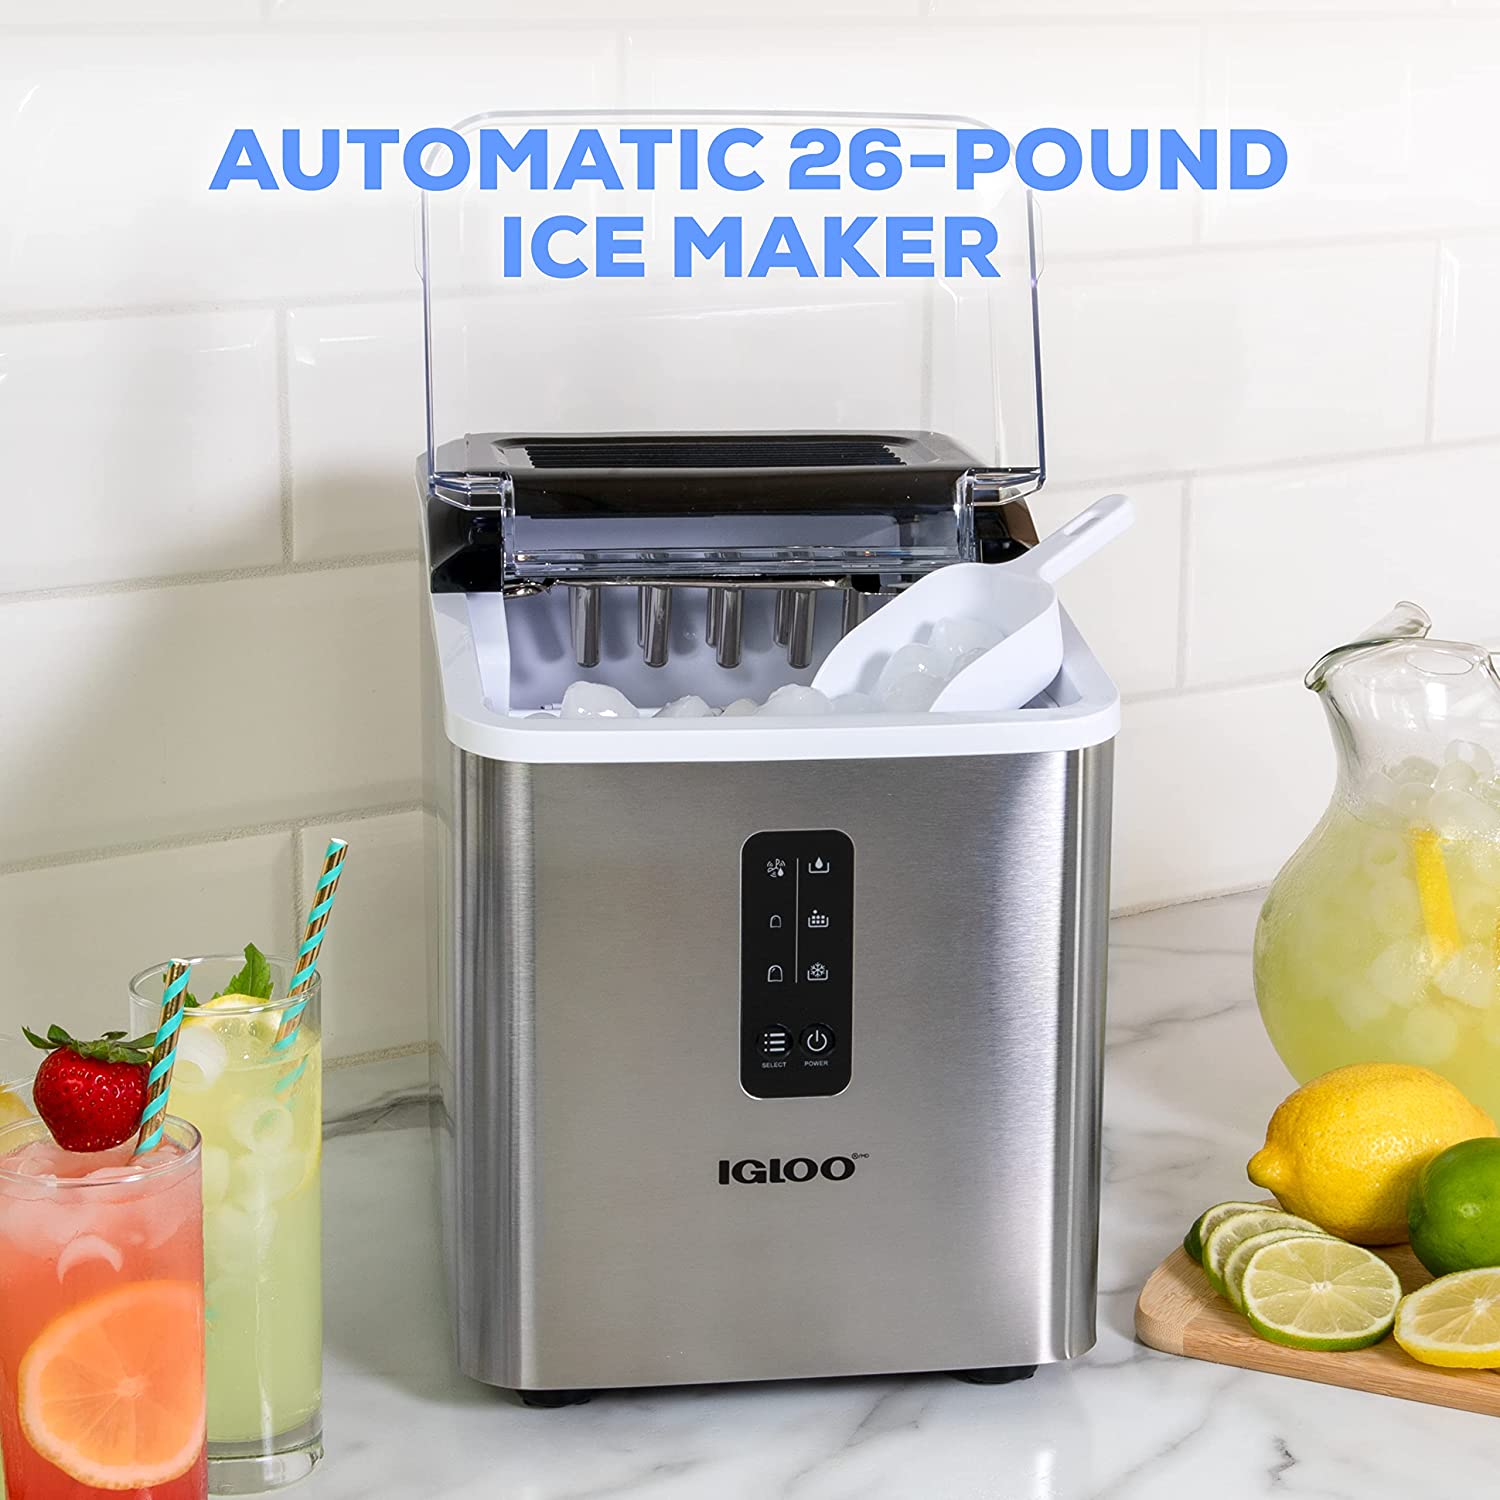 Igloo Automatic Ice Maker, Self- Cleaning, Countertop Size, 26 Pounds in 24  Hours, 9 Large or Small Ice Cubes in 7 Minutes, LED Control Panel, Scoop  Included 